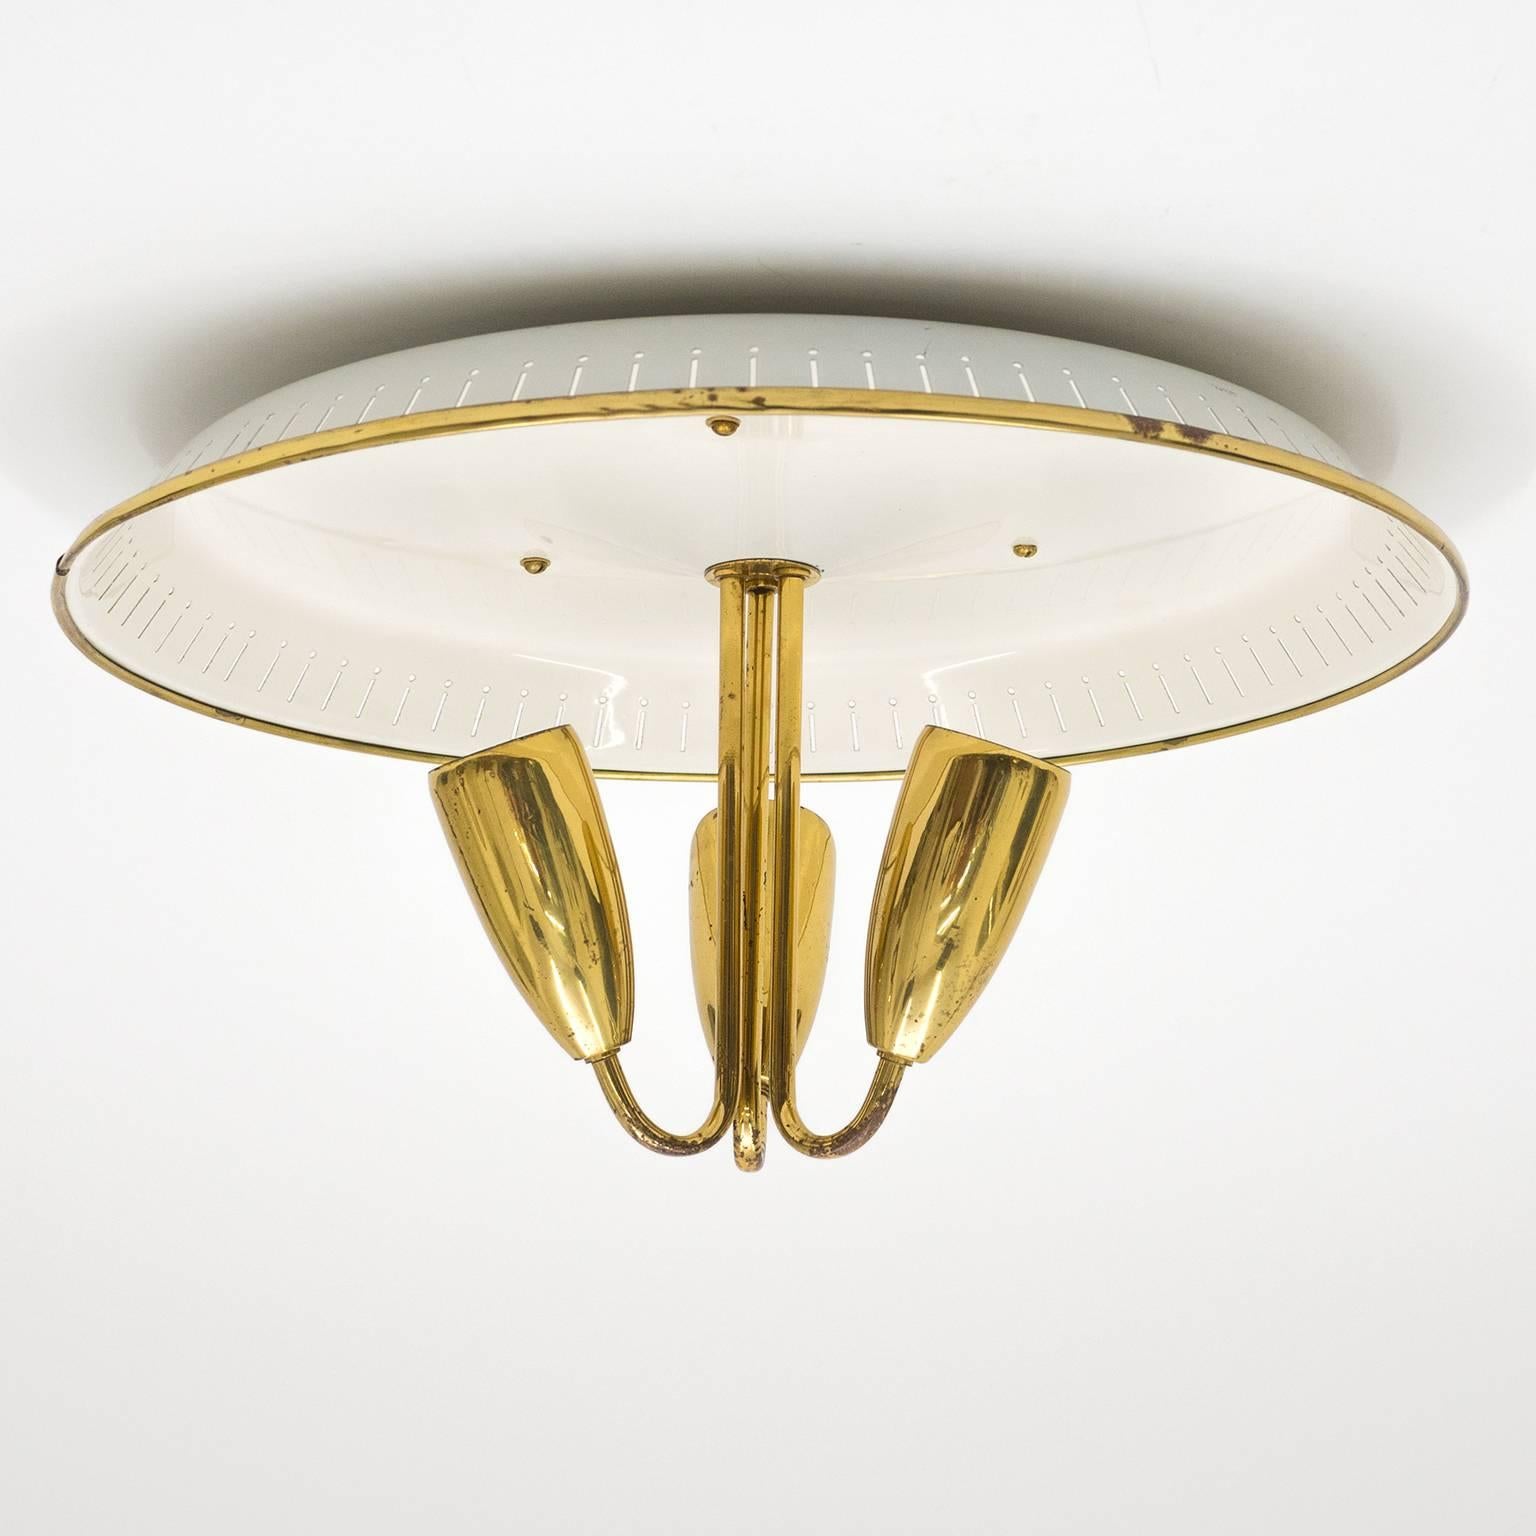 Stylish three-arm brass flush mount with a large perforated and lacquered reflector. Very good overall original condition with some age-related patina on the brass. Three E27 sockets with new wiring.